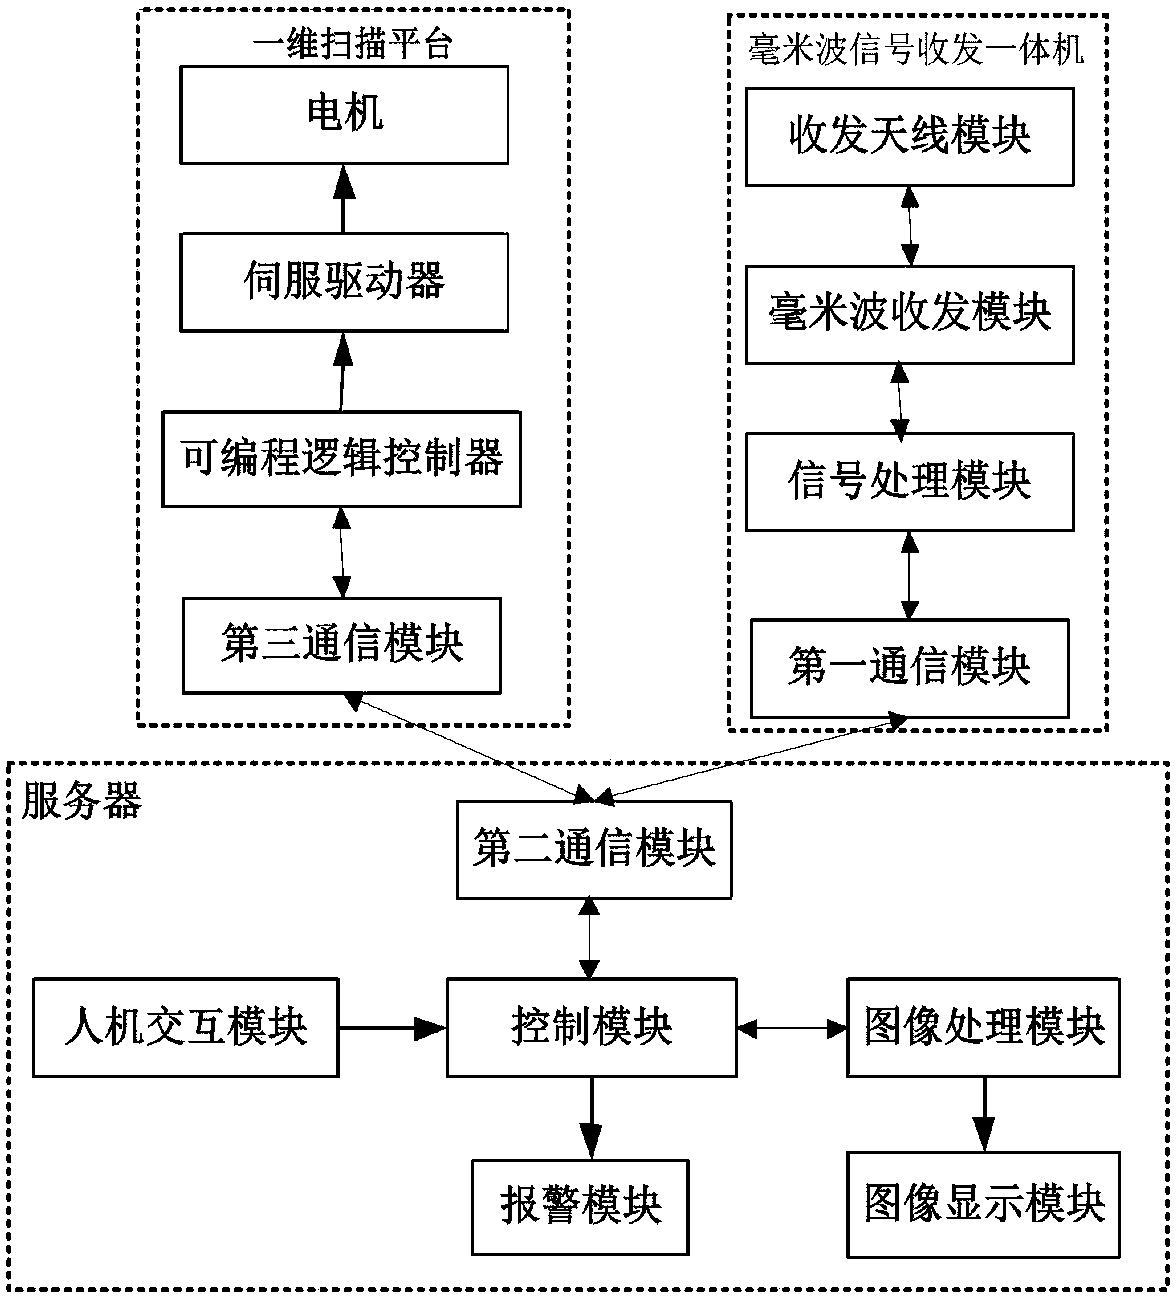 Active millimeter wave imaging security detection system and security detection method